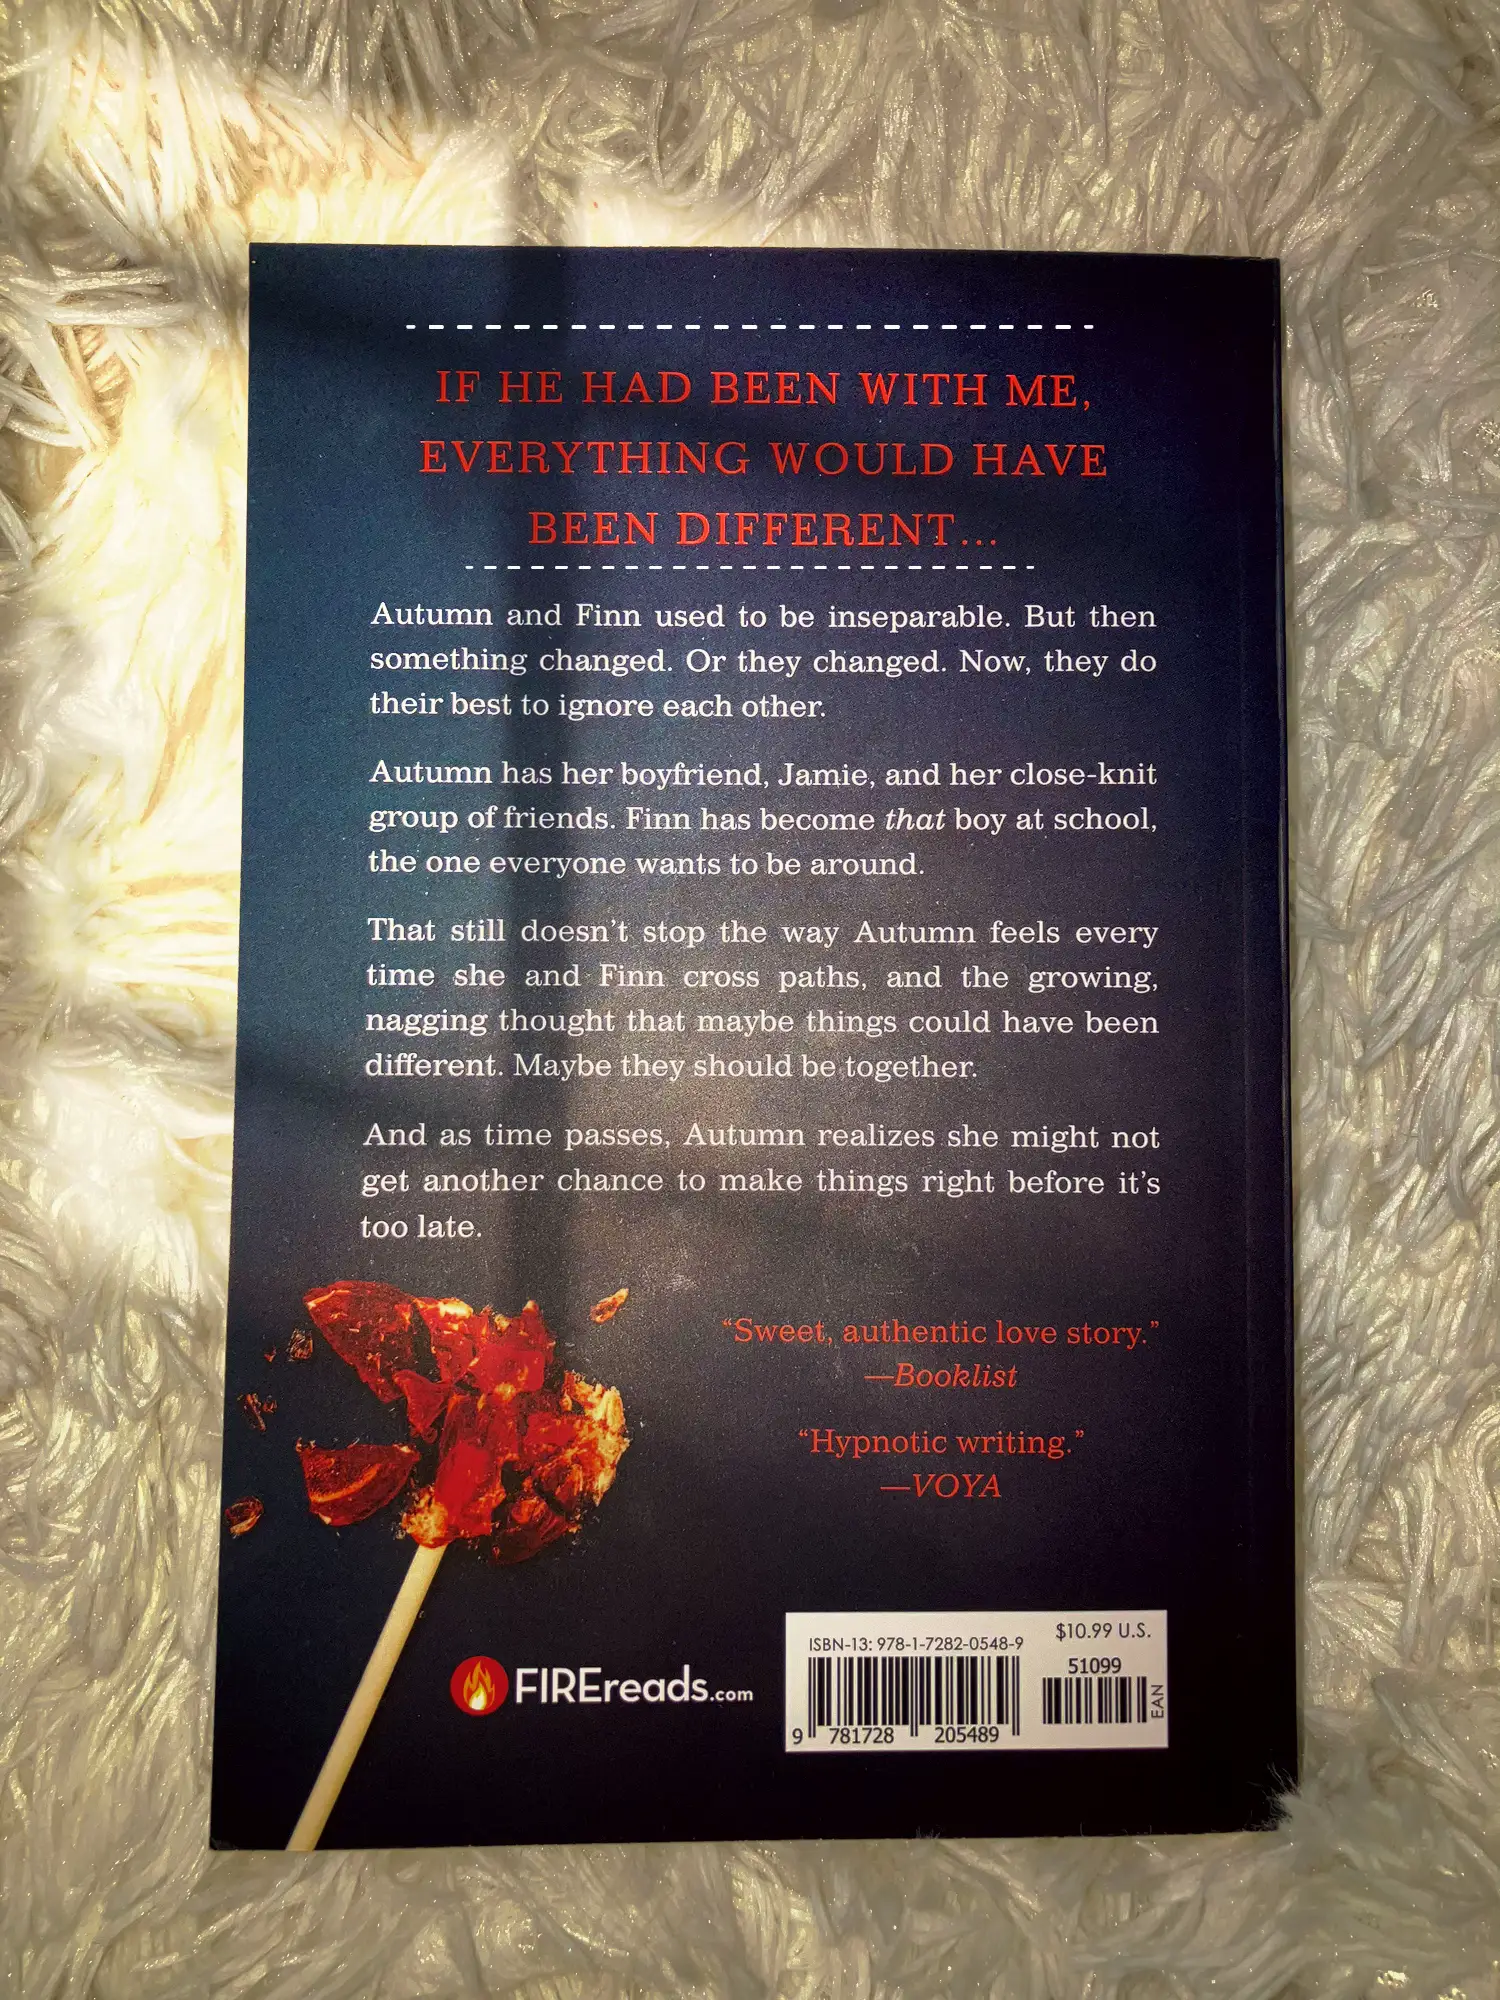  "If he had been with me, everything would have been different". A book cover with a flame on it.